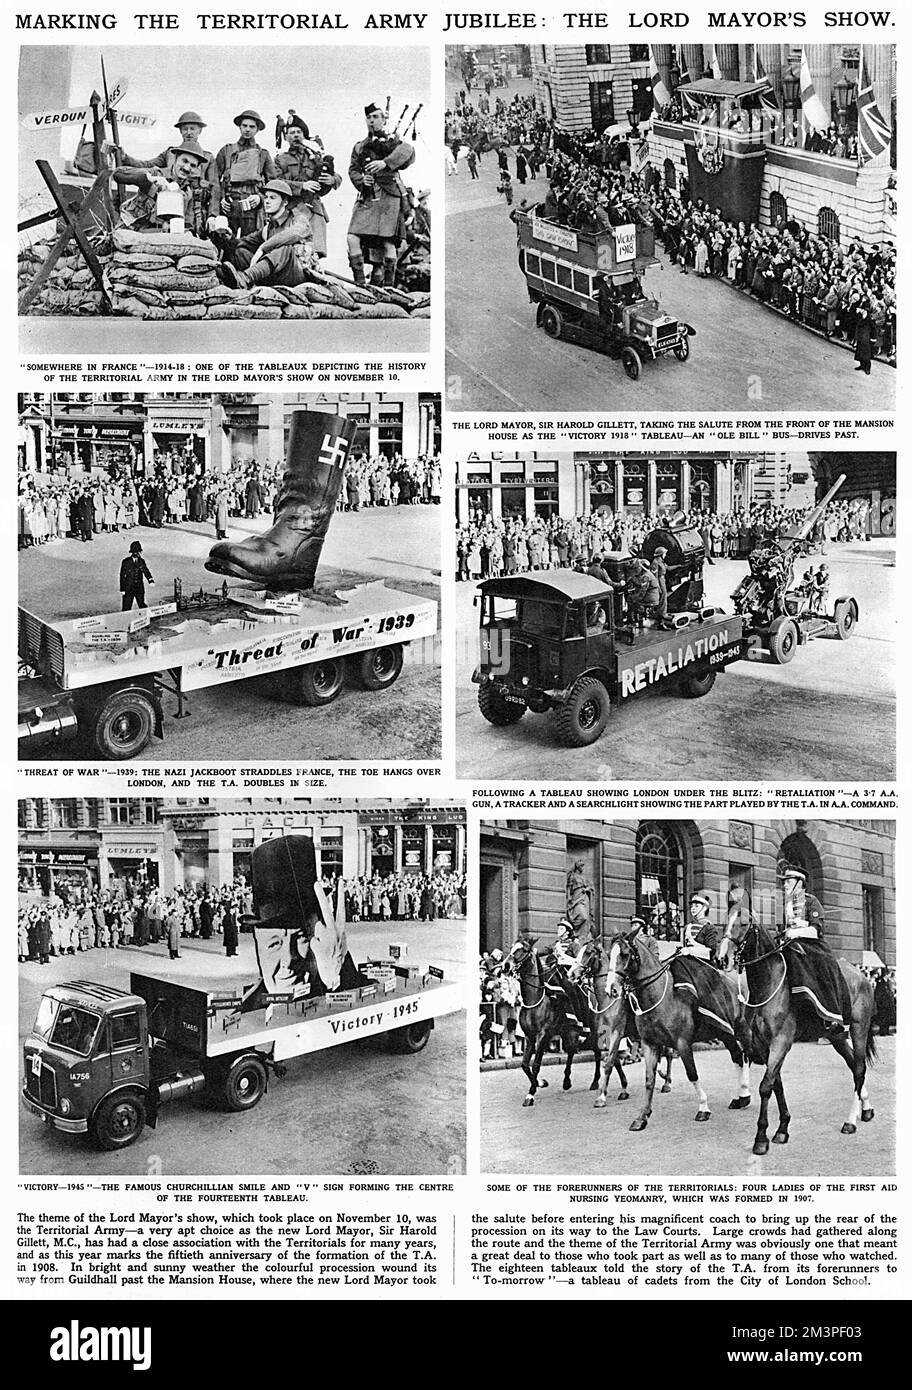 Marking the territorial army jubilee at the Lord Mayor's Show in London. Among other scenes: a tableaux depicting the history of the territorial army, four ladies of the First Aid Nursing Yeomanry and a float with a cut out of Winston Churchill with his famous 'V' sign.     Date: 1958 Stock Photo